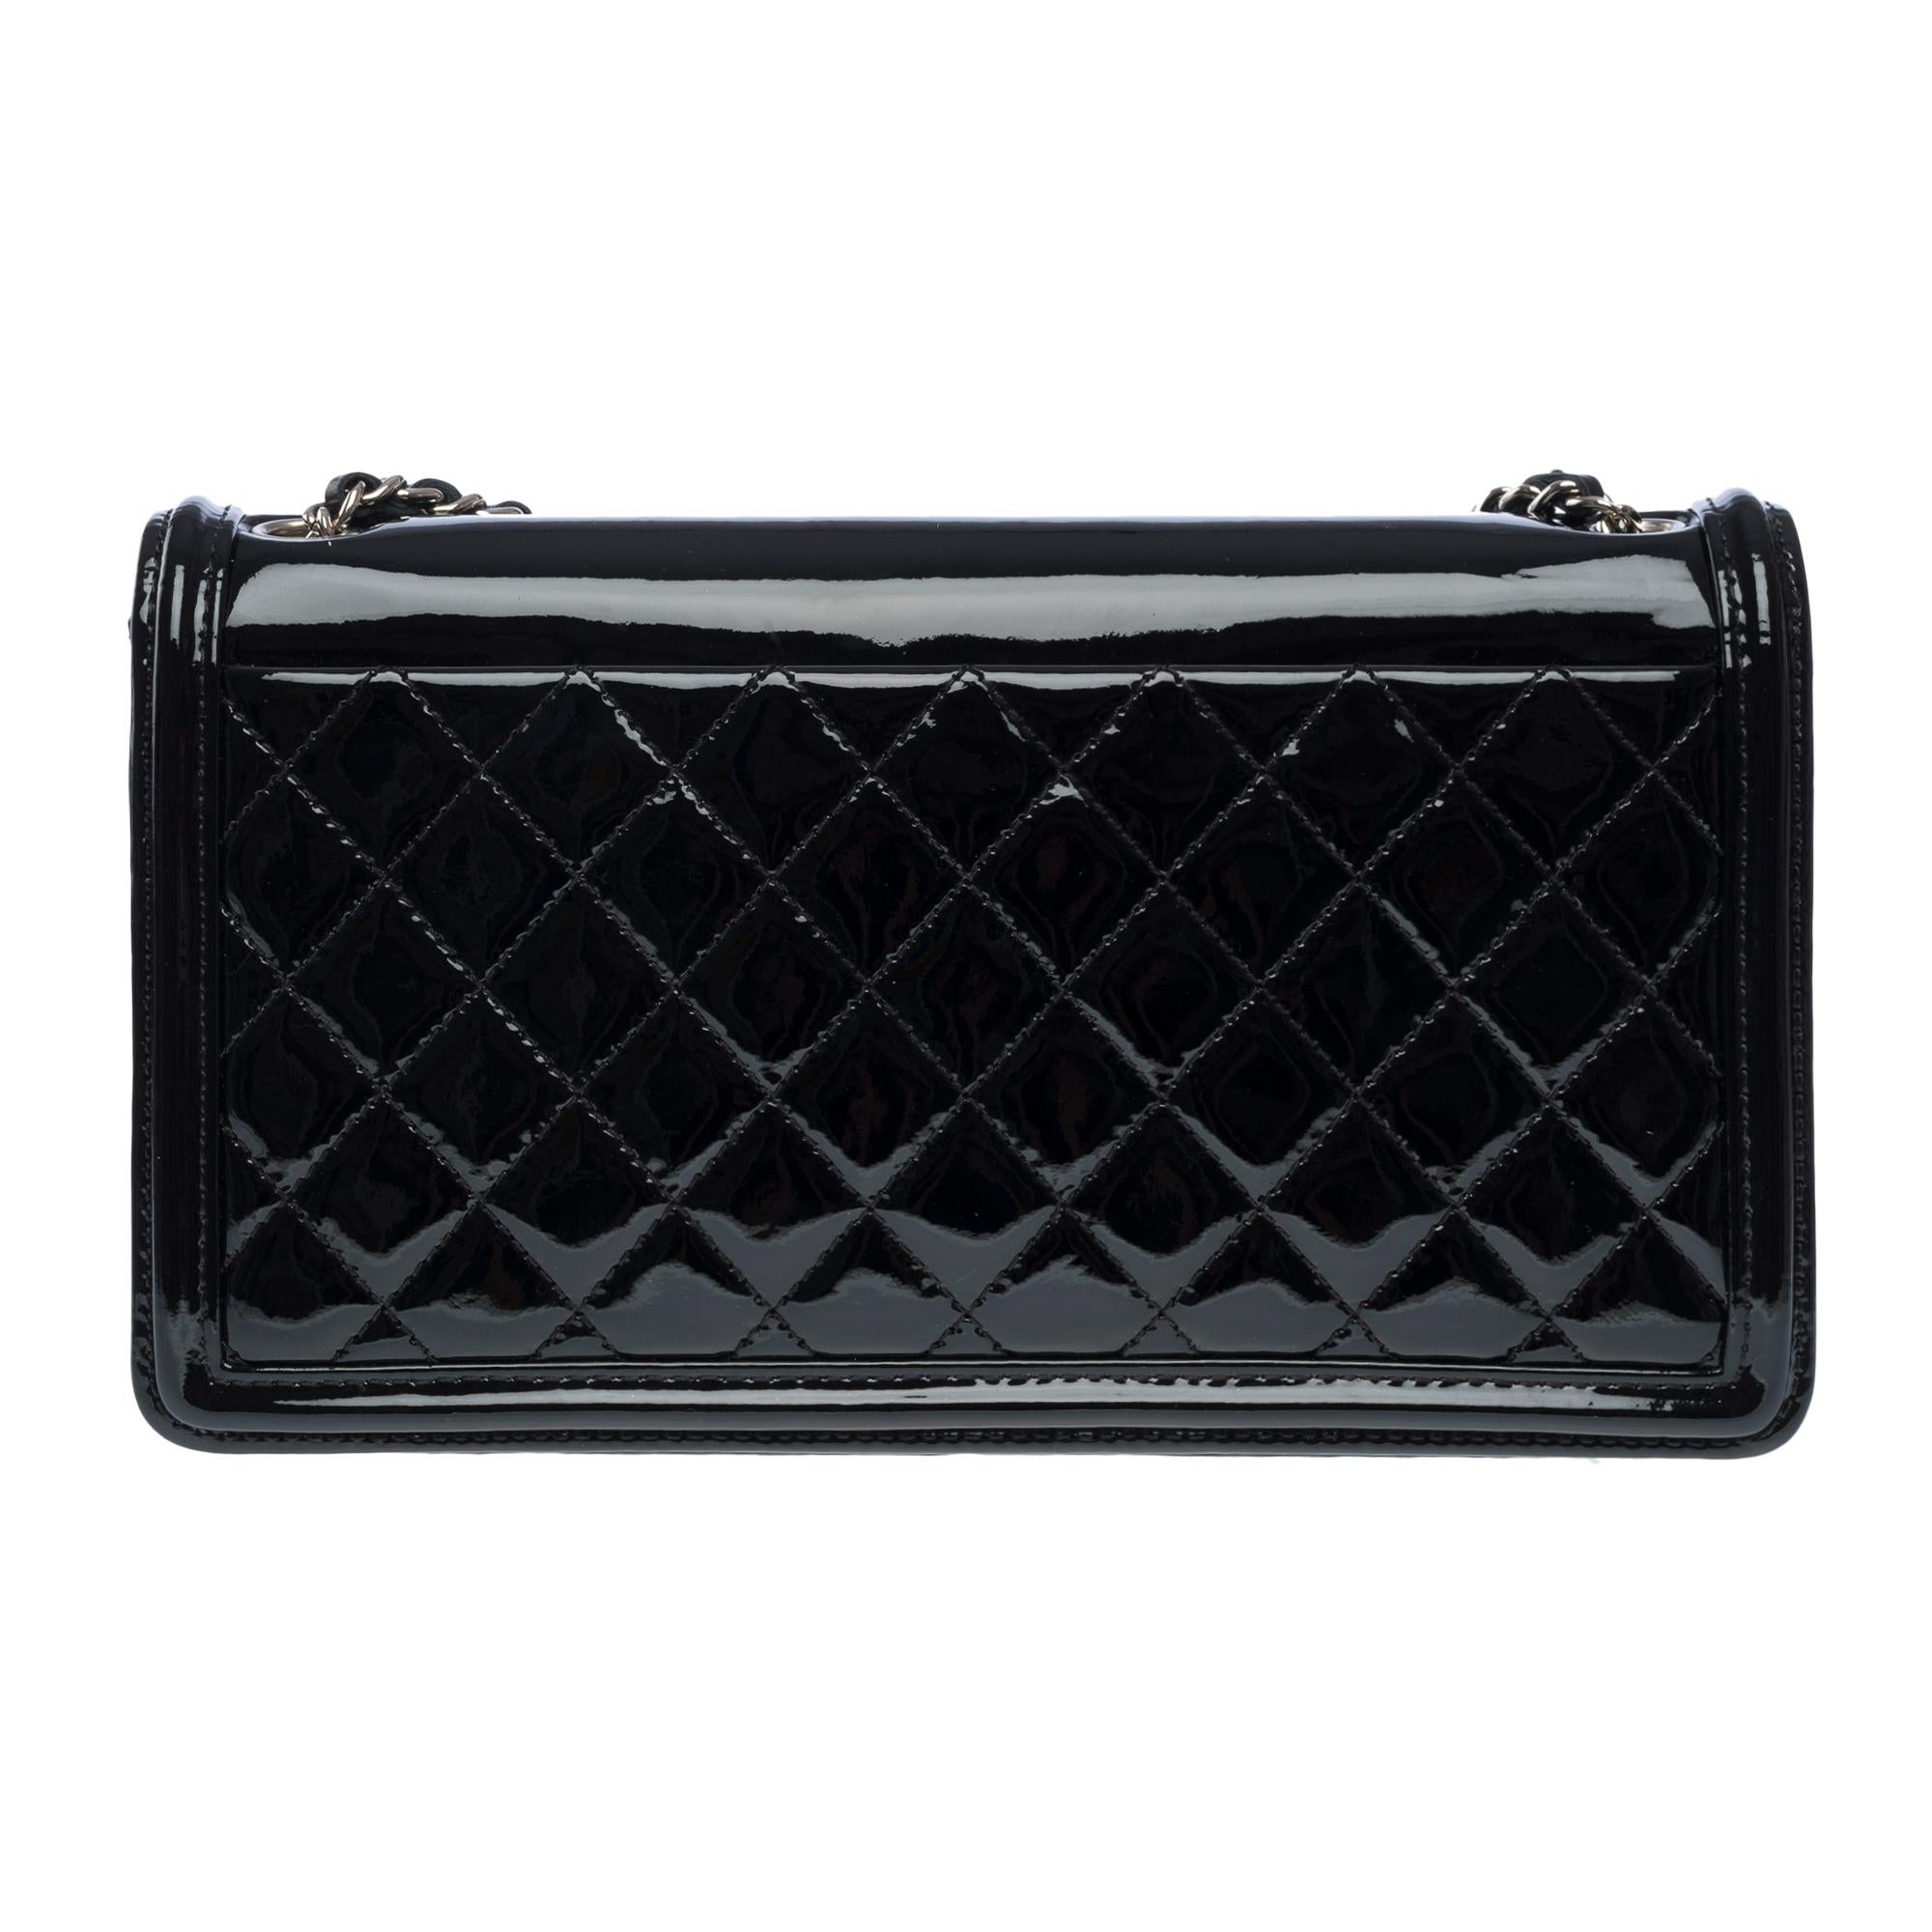 Women's Limited edition Chanel Lego Brick shoulder flap bag in black&white leather, SHW